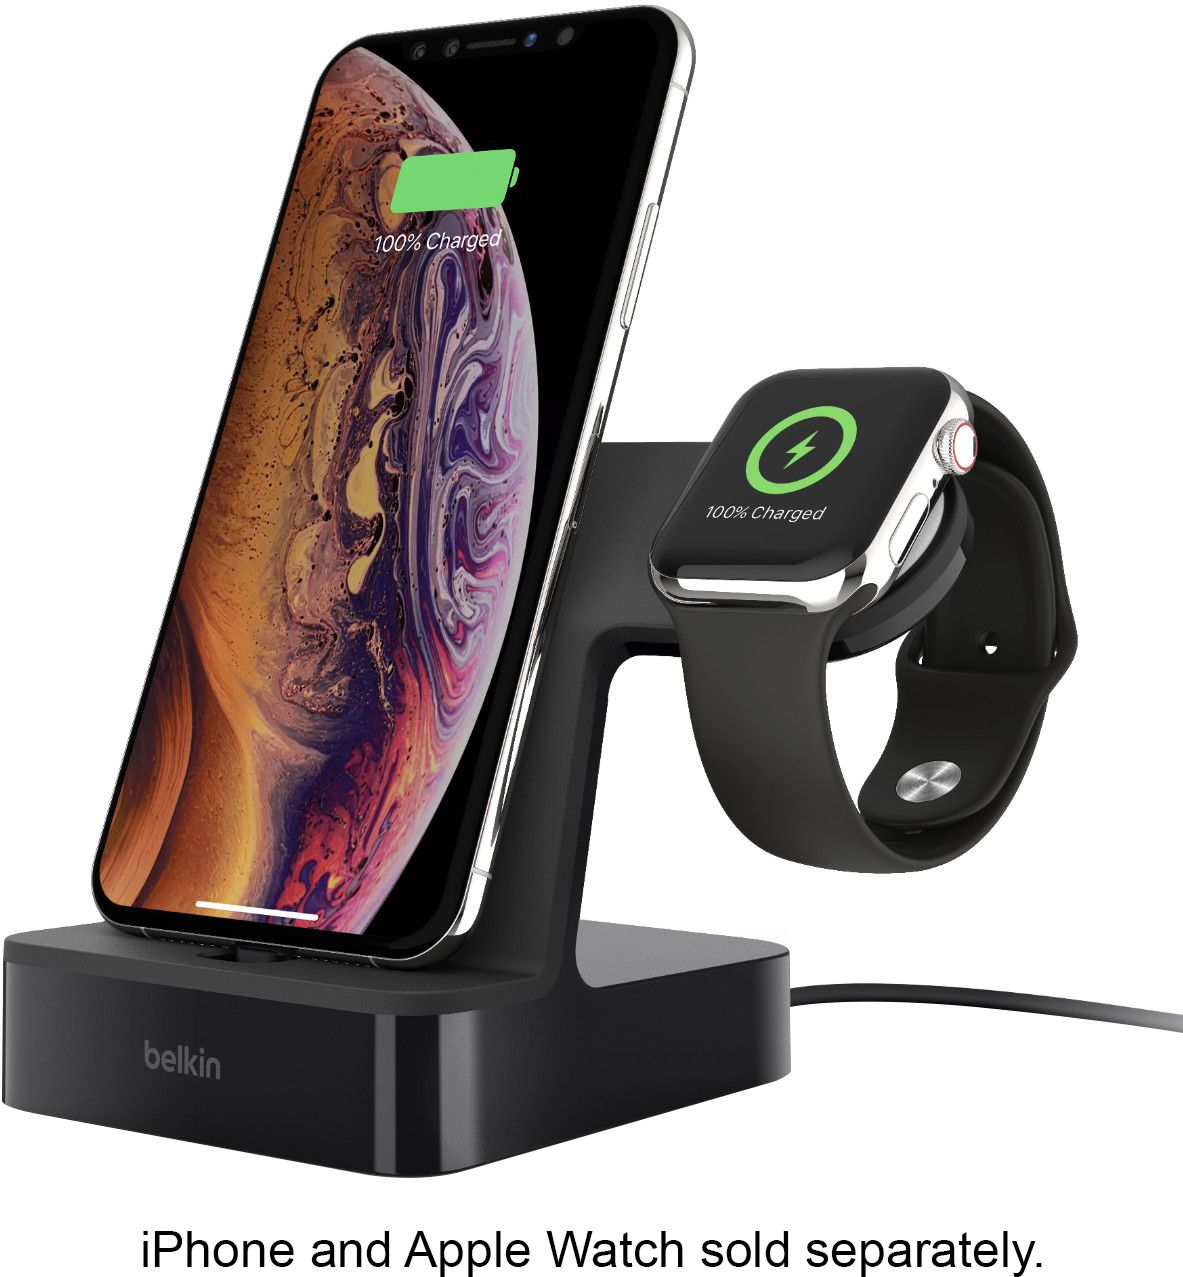 Iphone 11 Wireless Charger - Best Buy